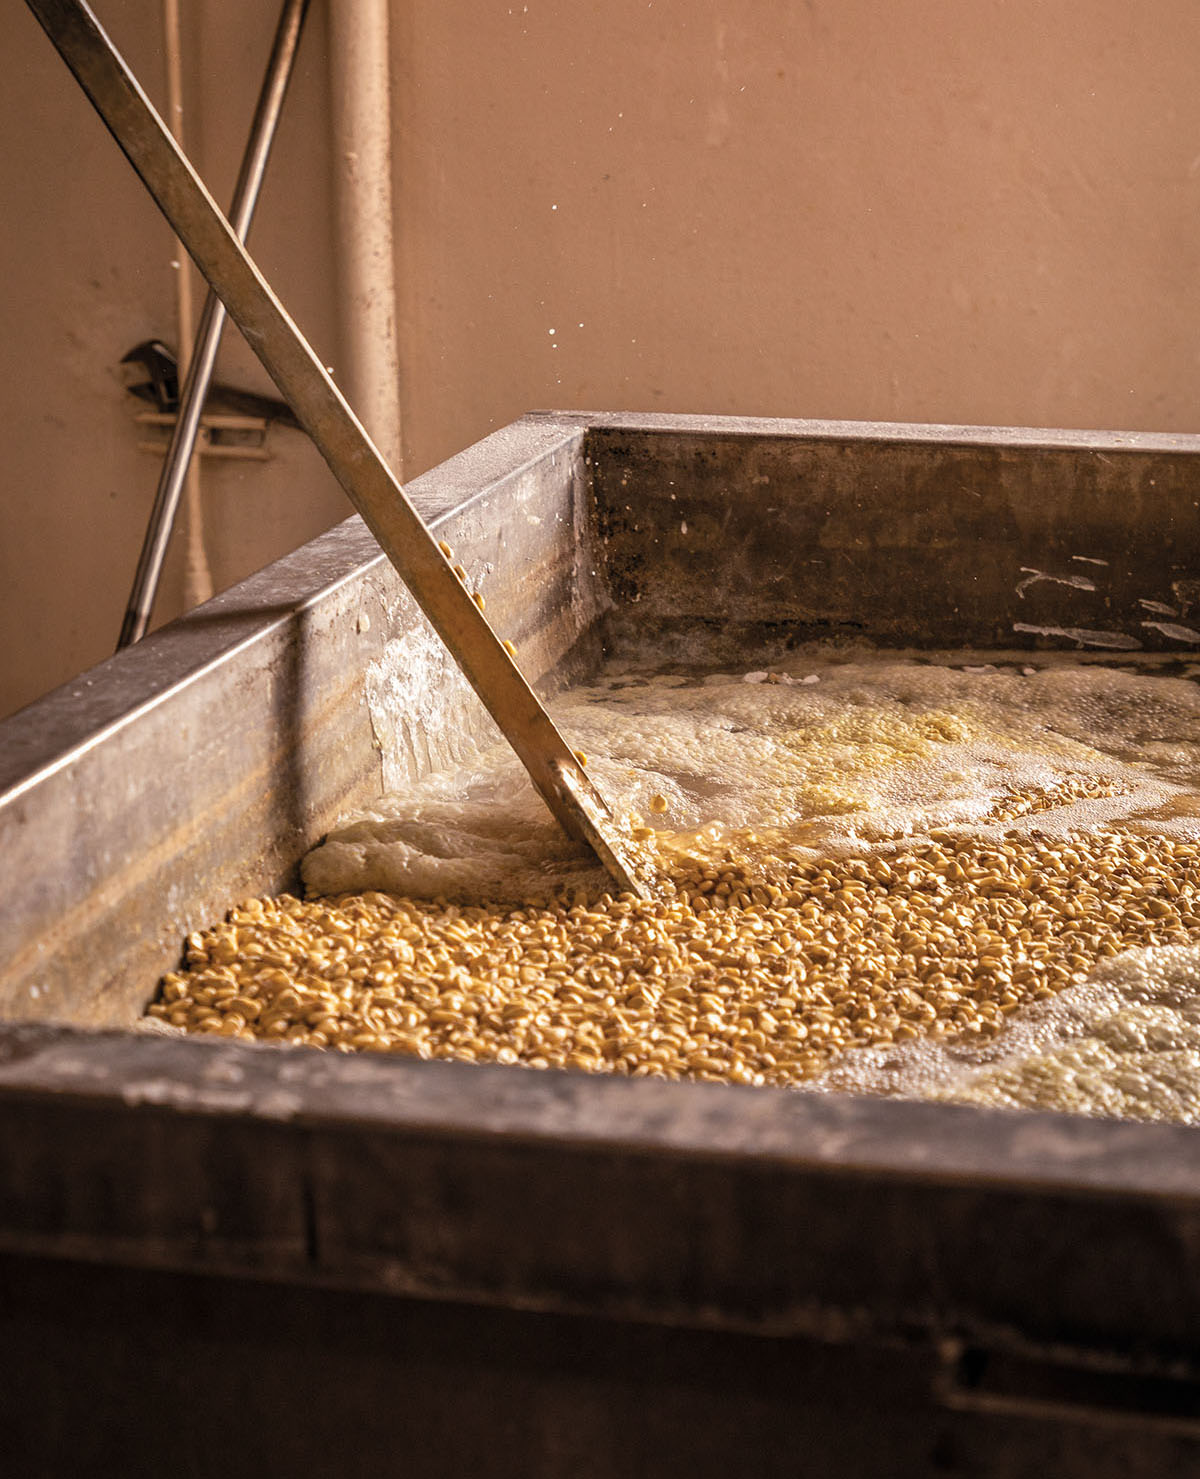 A wooden instrument is used to stir a large vat of boiling corn